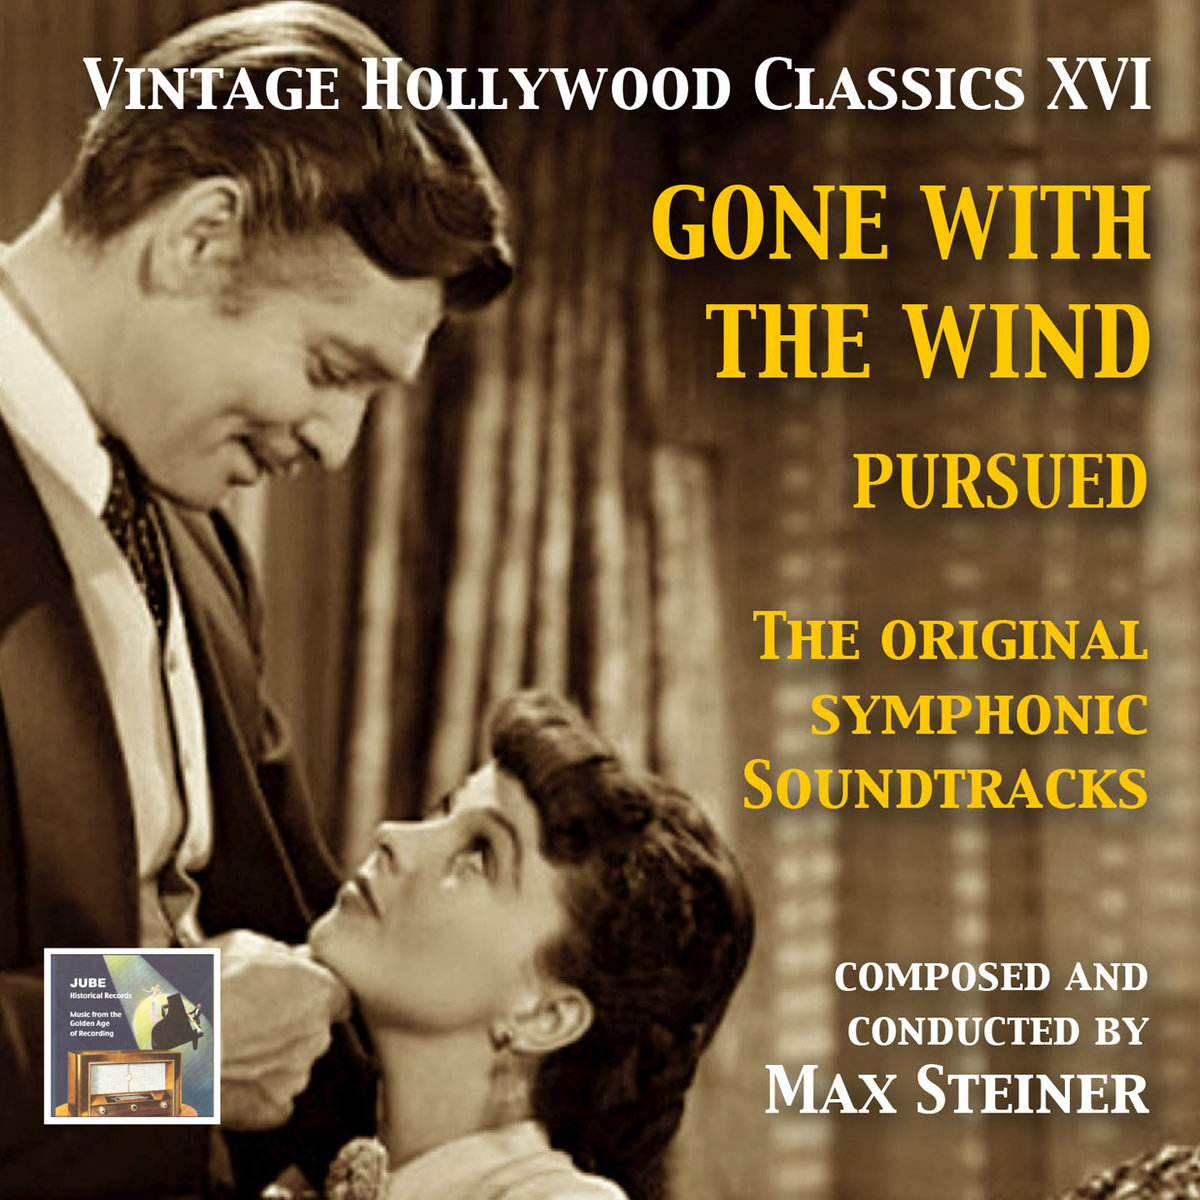 Vintage Hollywood Classics Vol 16 Gone With The Wind And Pursued